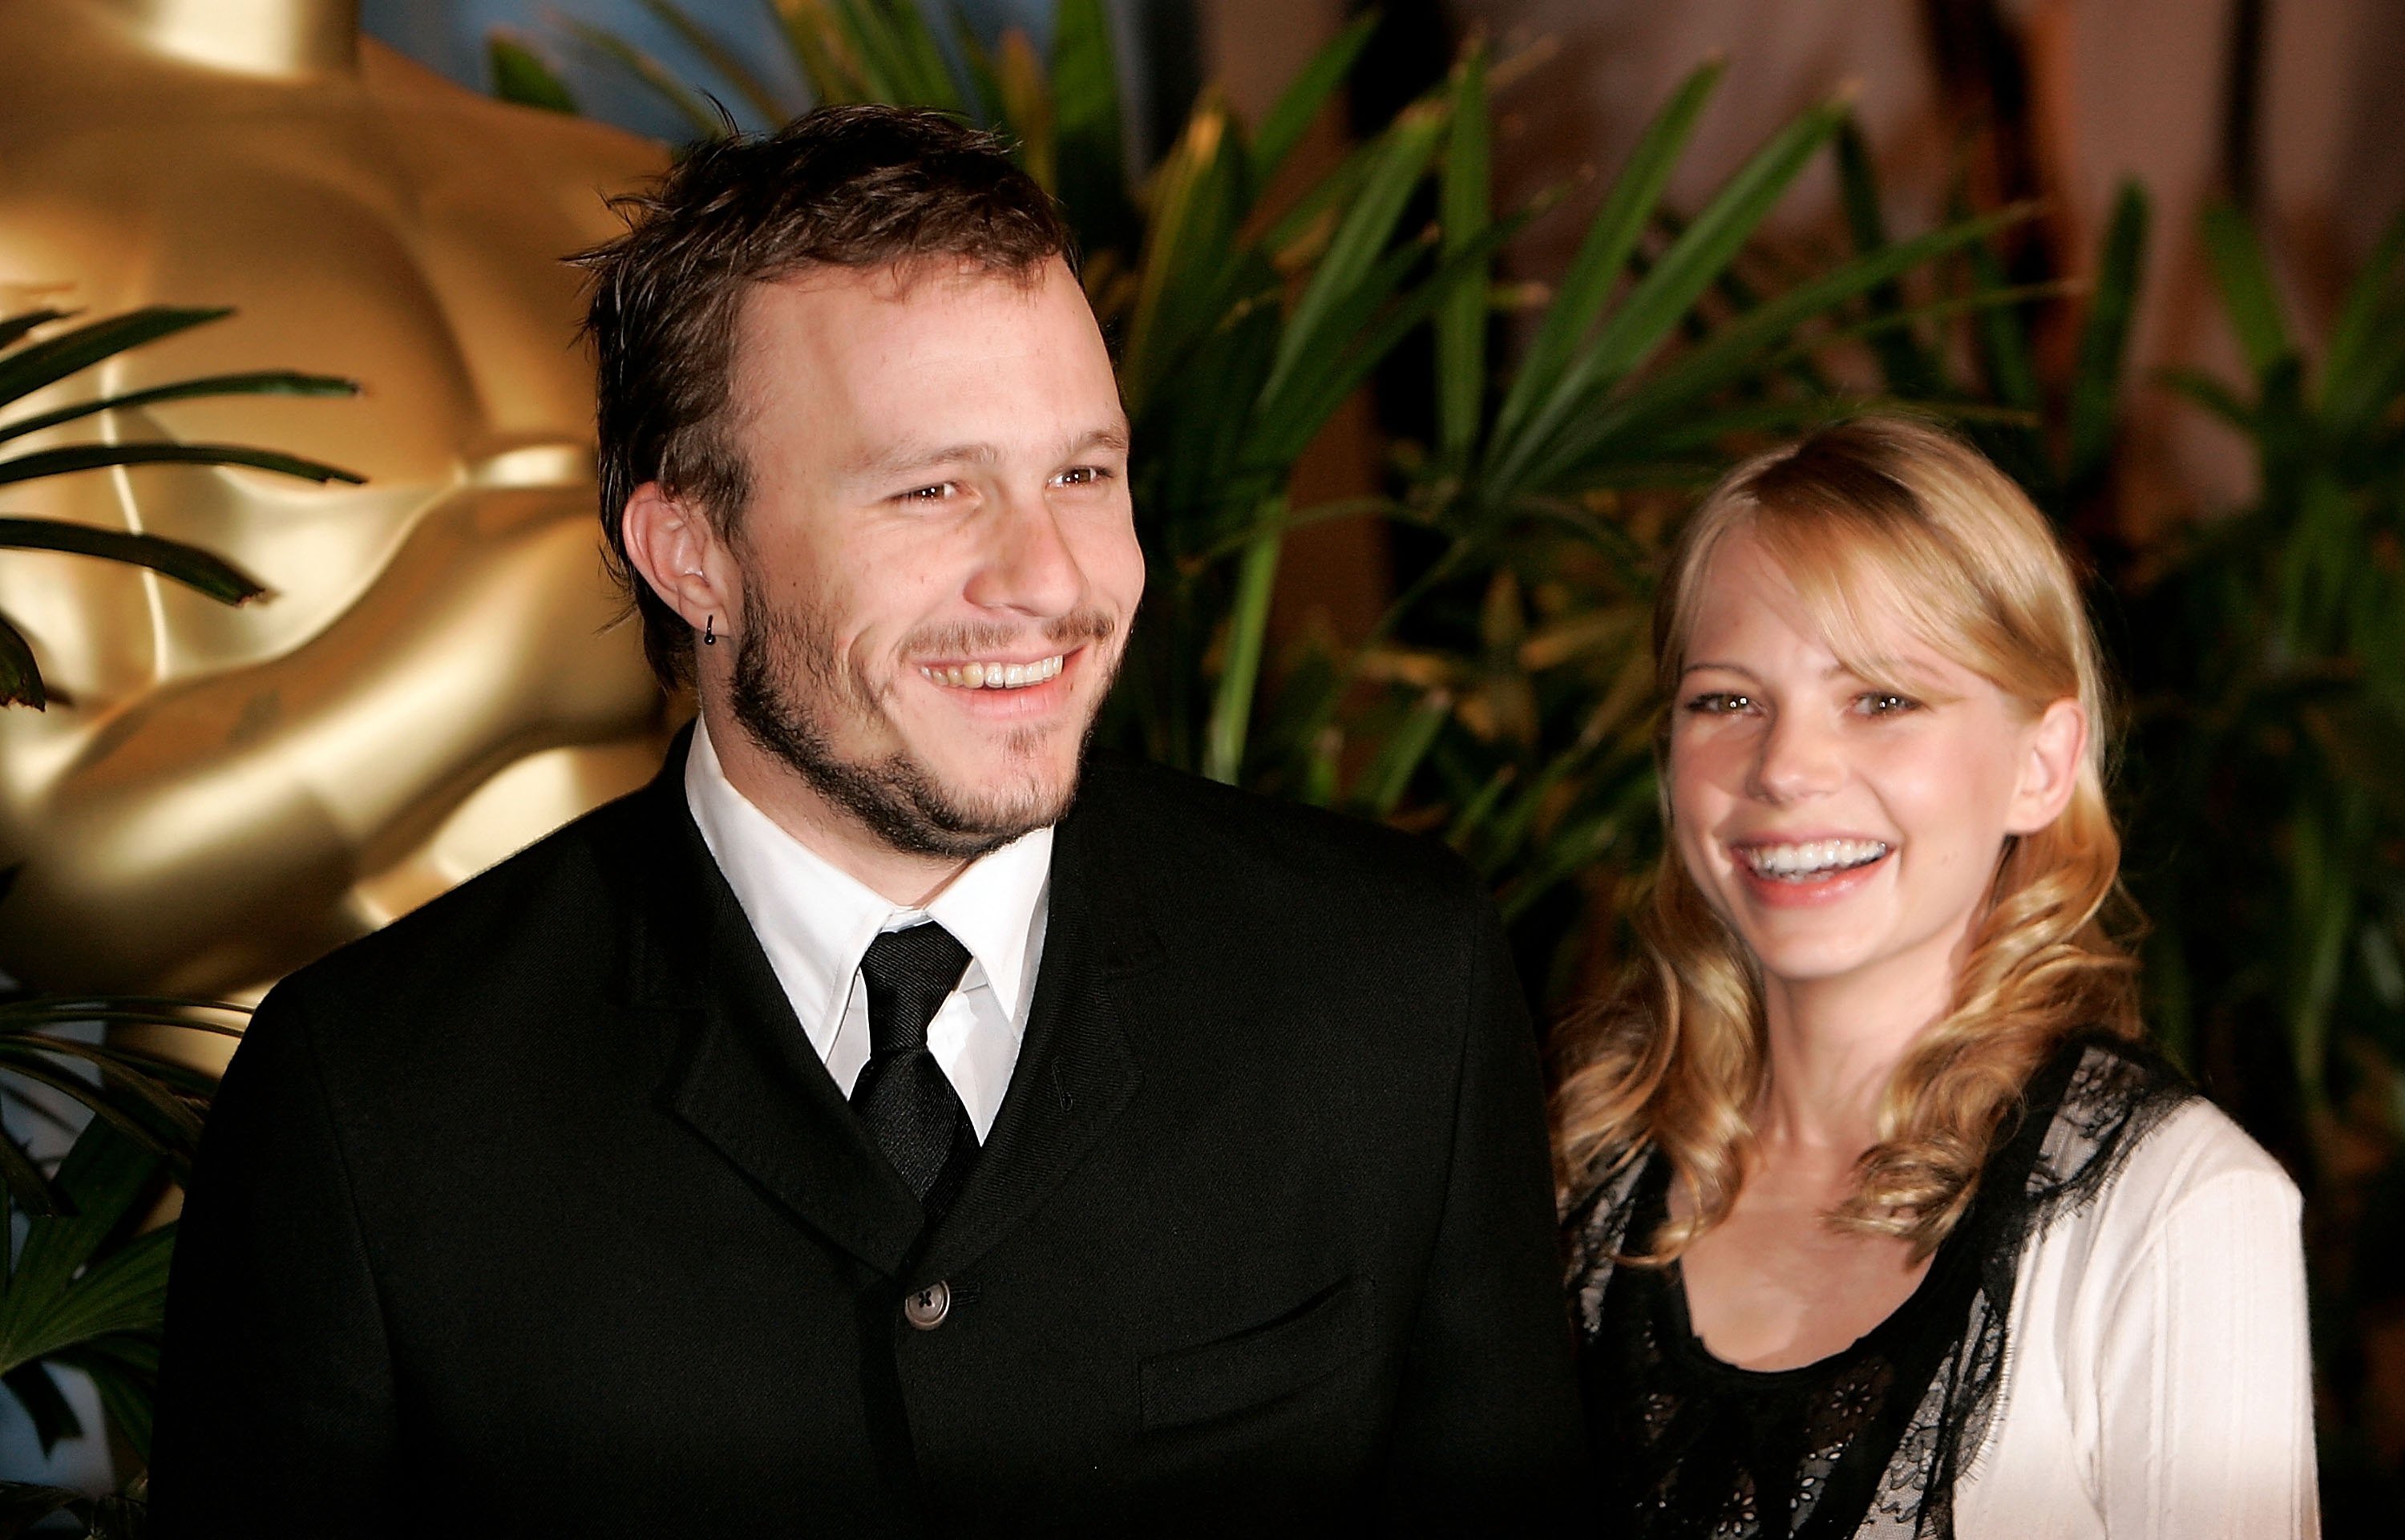 Heath Ledger and Michelle Williams at the Oscar Nominees Luncheon at the Beverly Hilton Hotel in 2006. | Photo: Getty Images